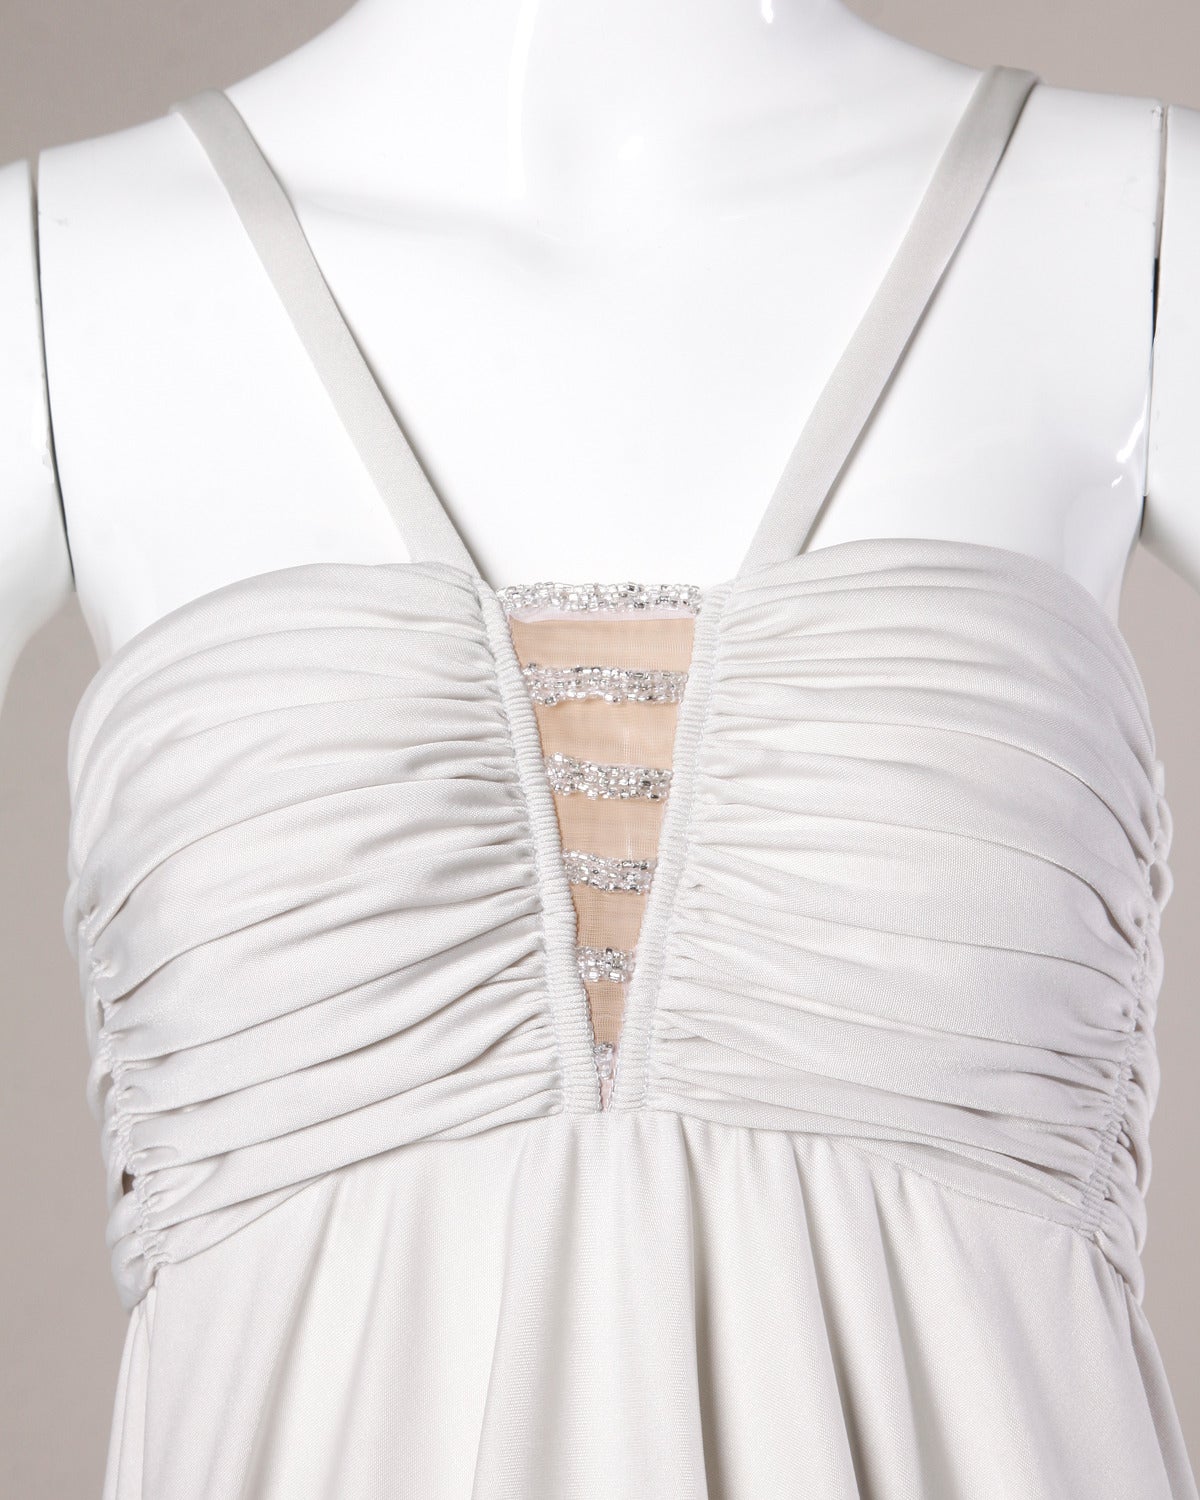 Pale gray maxi dress in slinky light weight nylon jersey. Empire waist and beaded nude illusion cut out detail at the bust. 

Details:

Partially Lined
Back Zip and Hook Closure
Estimated Size: Small
Color: Pale Gray
Fabric: Jersey
Label: